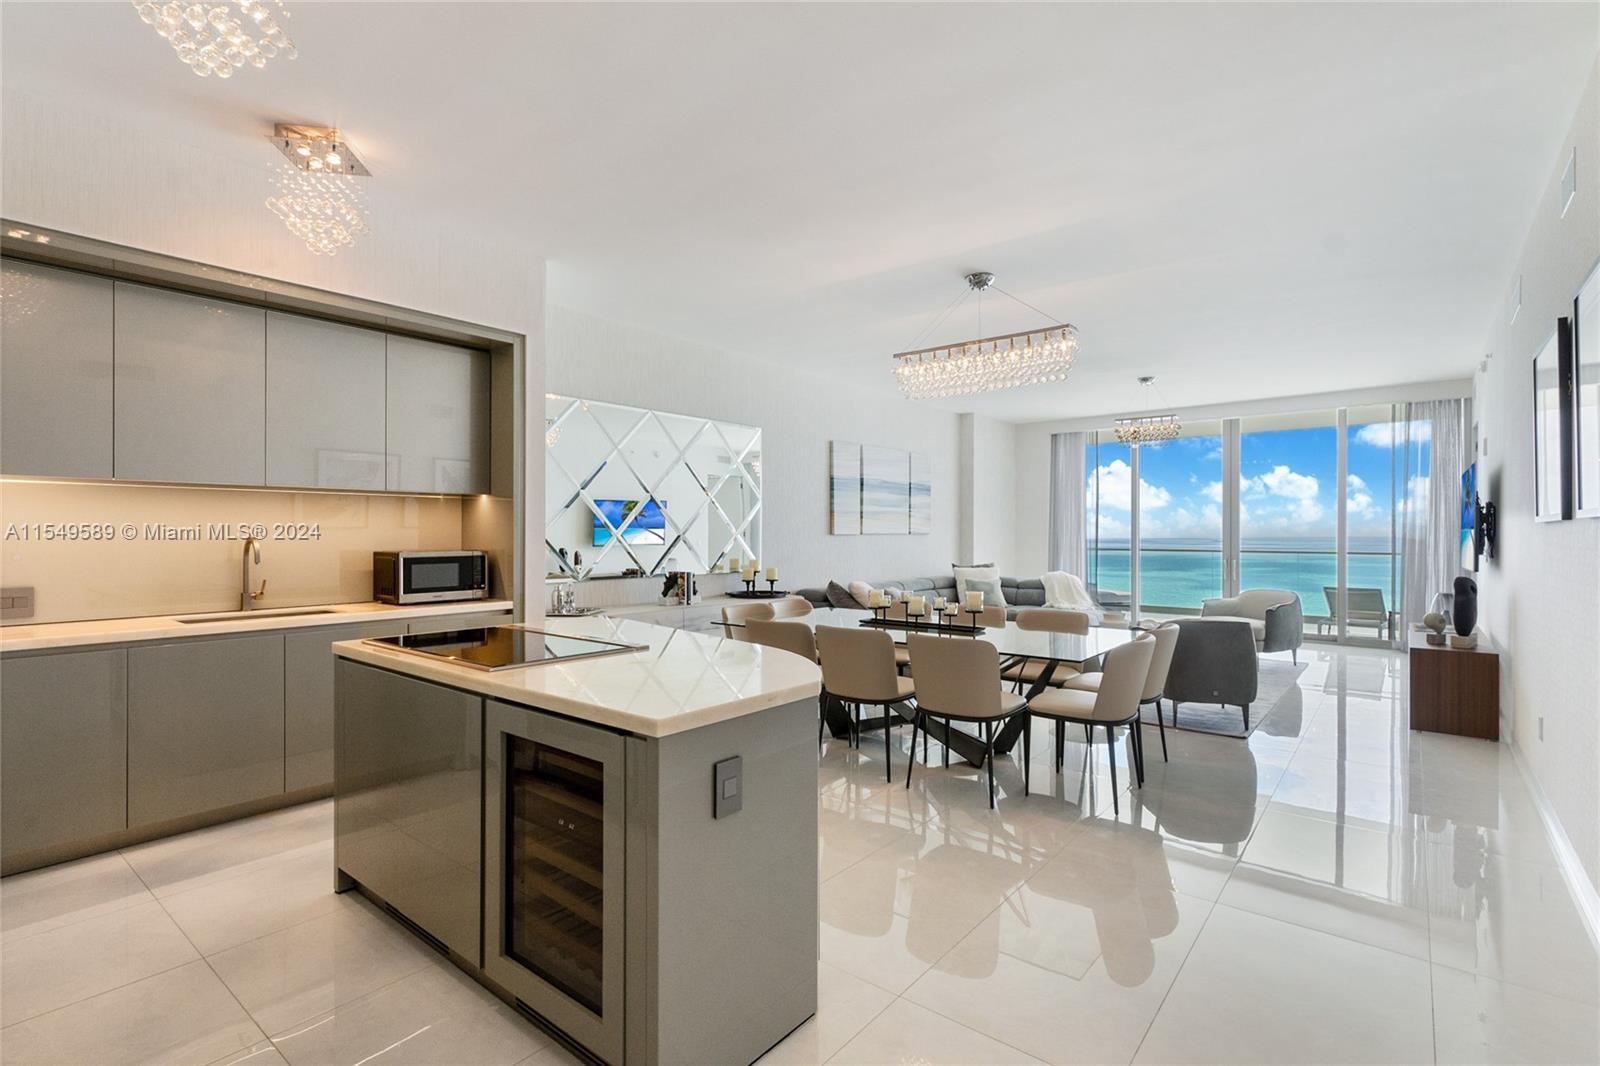 Residences by Armani Casa 2703 offered fully furnished and turnkey for lease. Designer decorated, ta